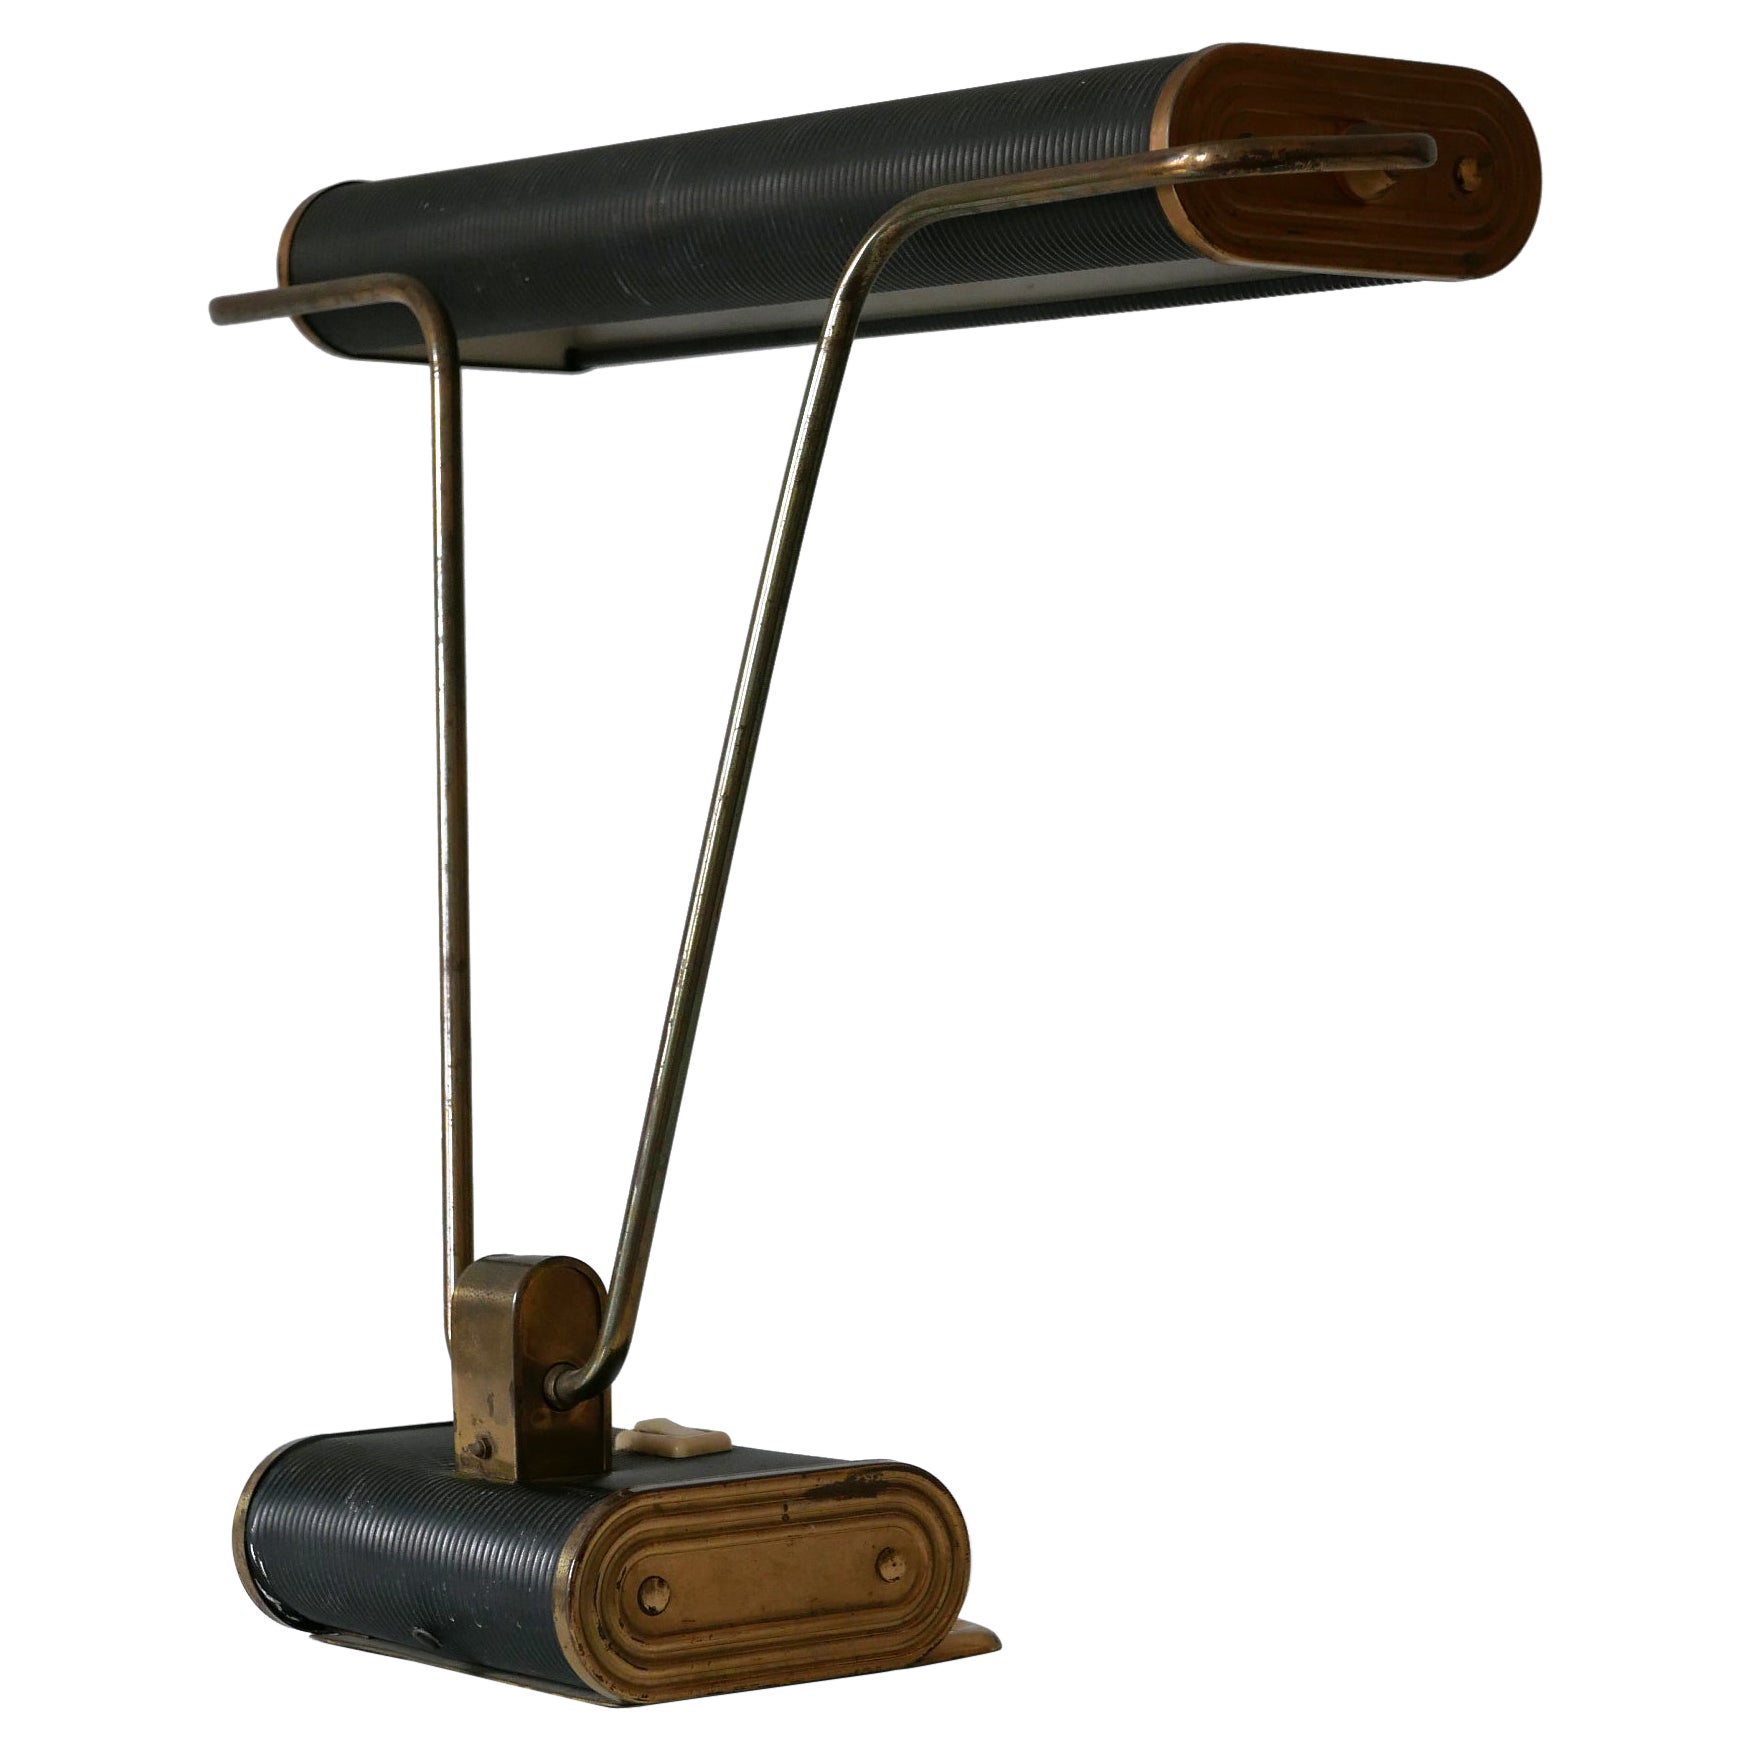 Art Deco Table Lamp or Desk Light 'No 71' by André Mounique for Jumo 1930s For Sale